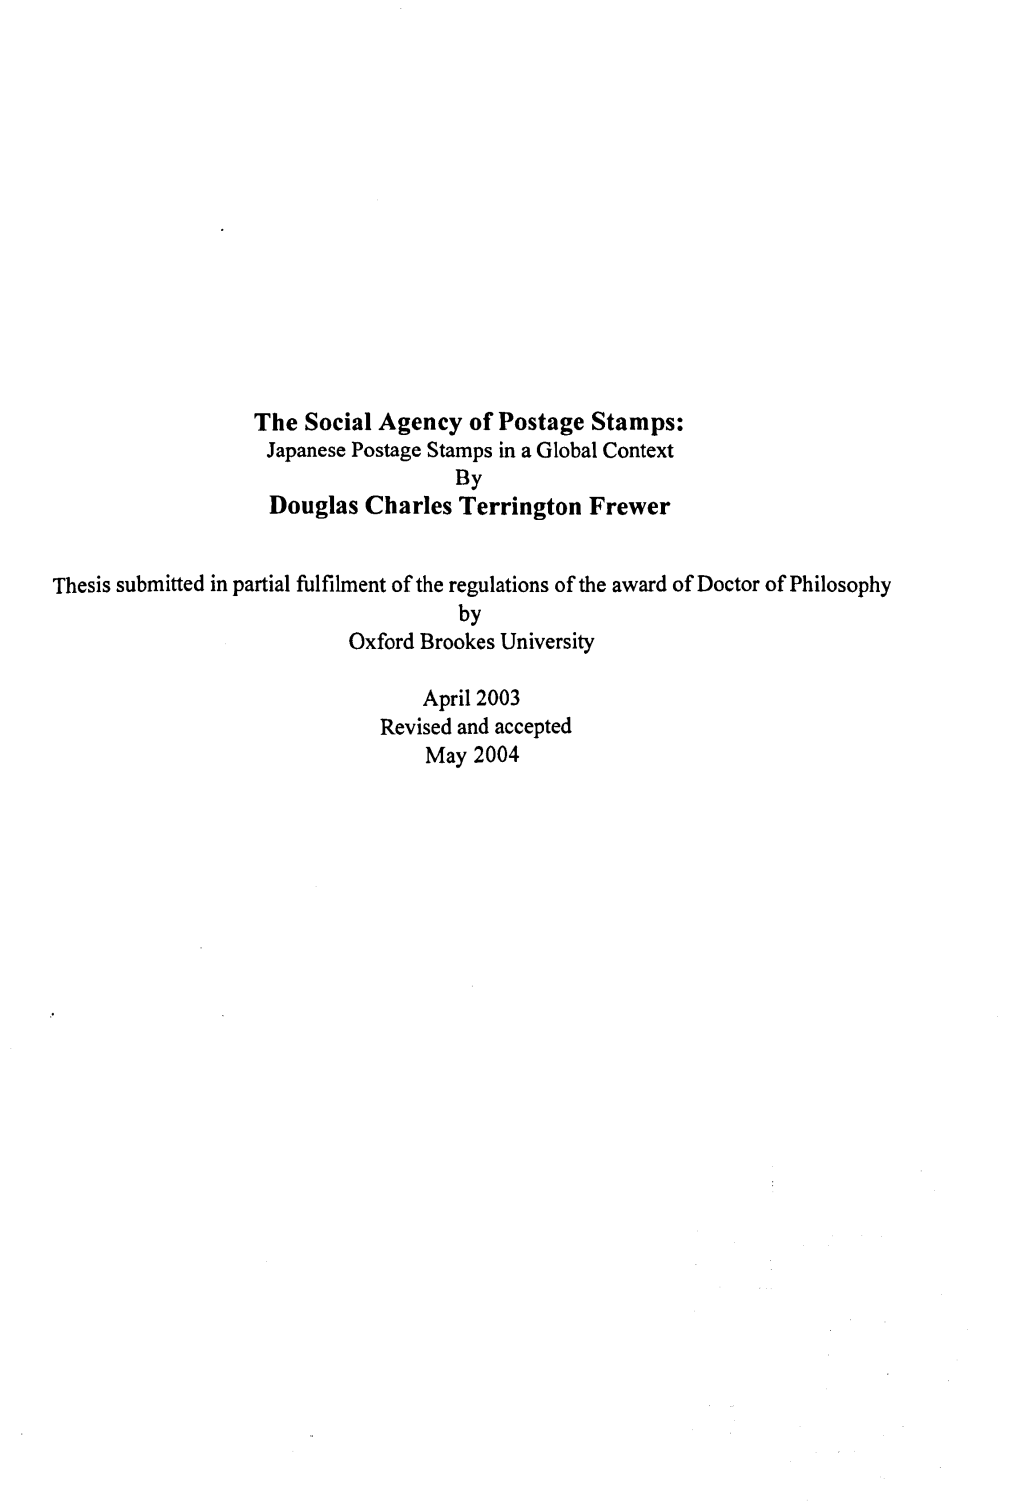 The Social Agency of Postage Stamps: Japanese Postage Stamps in a Global Context by Douglas Charles Terrington Frewer